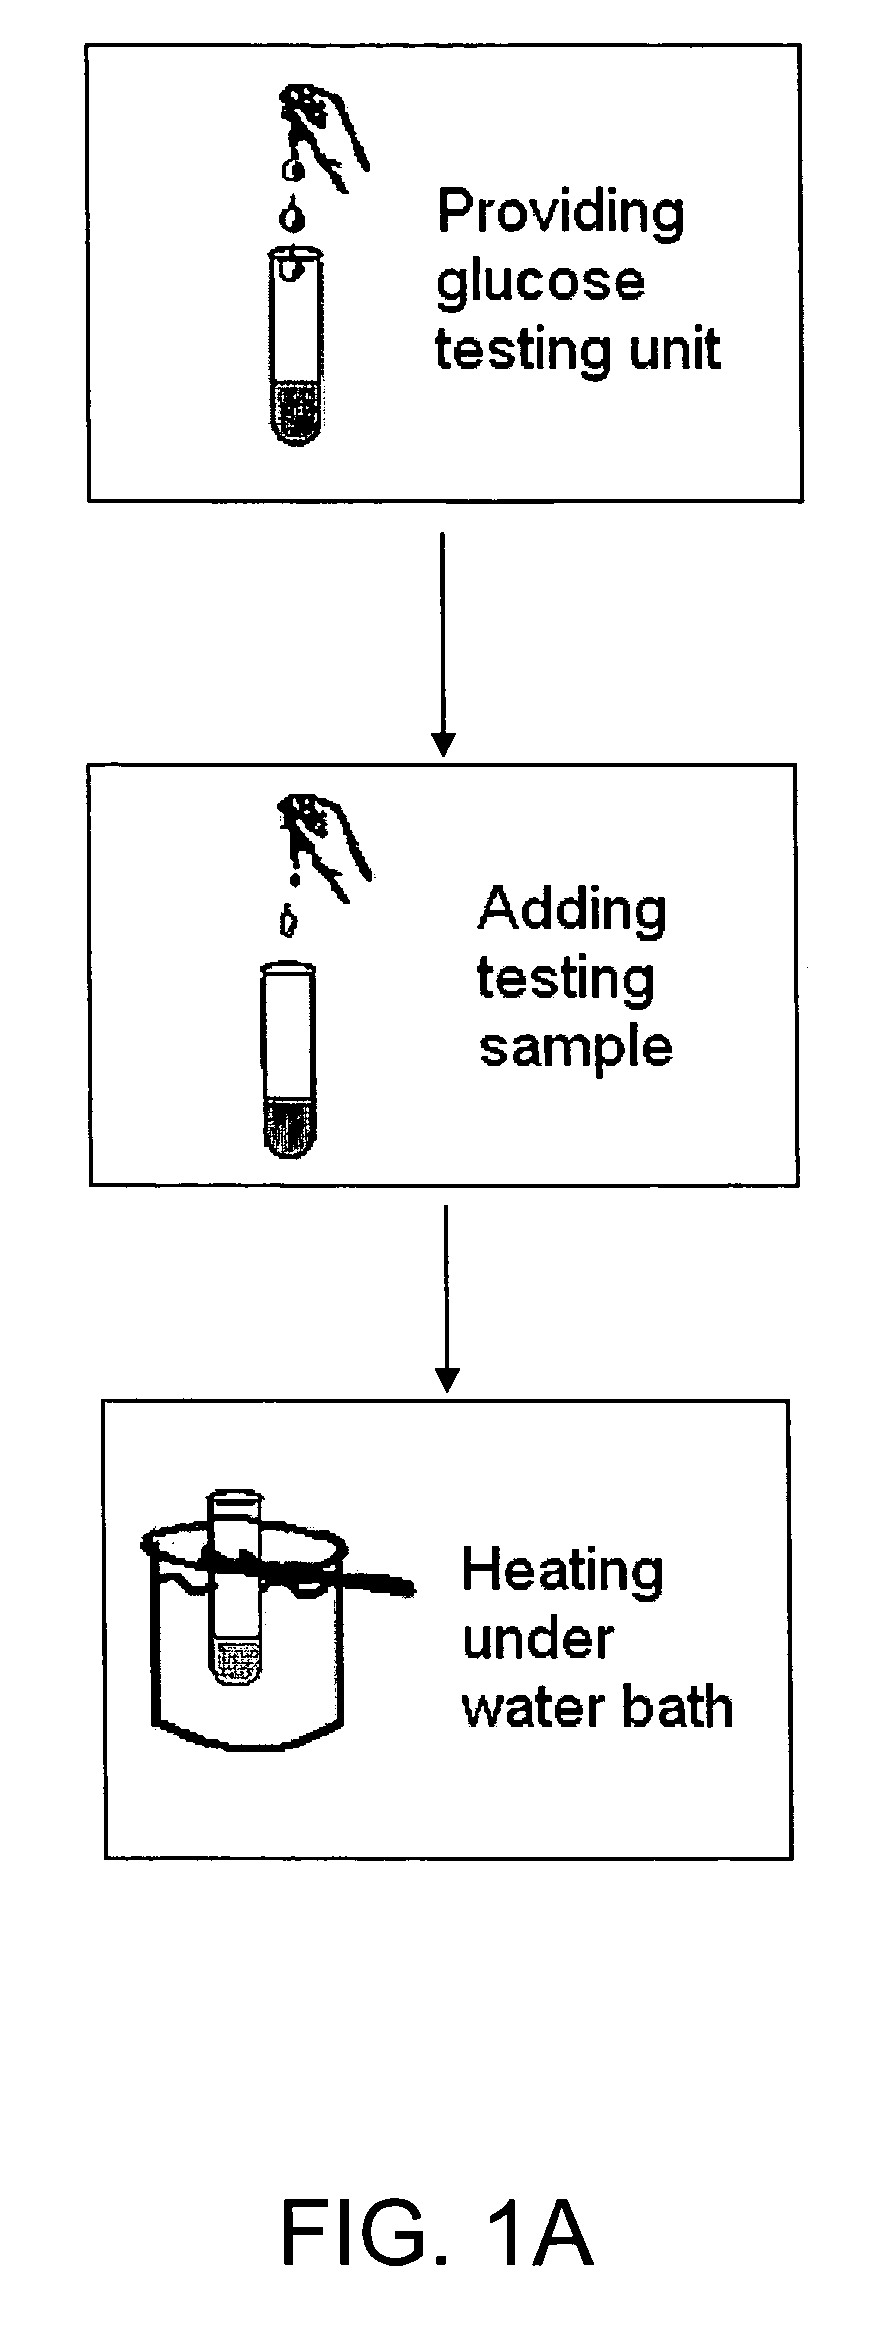 Composition and method of use of medical test kit